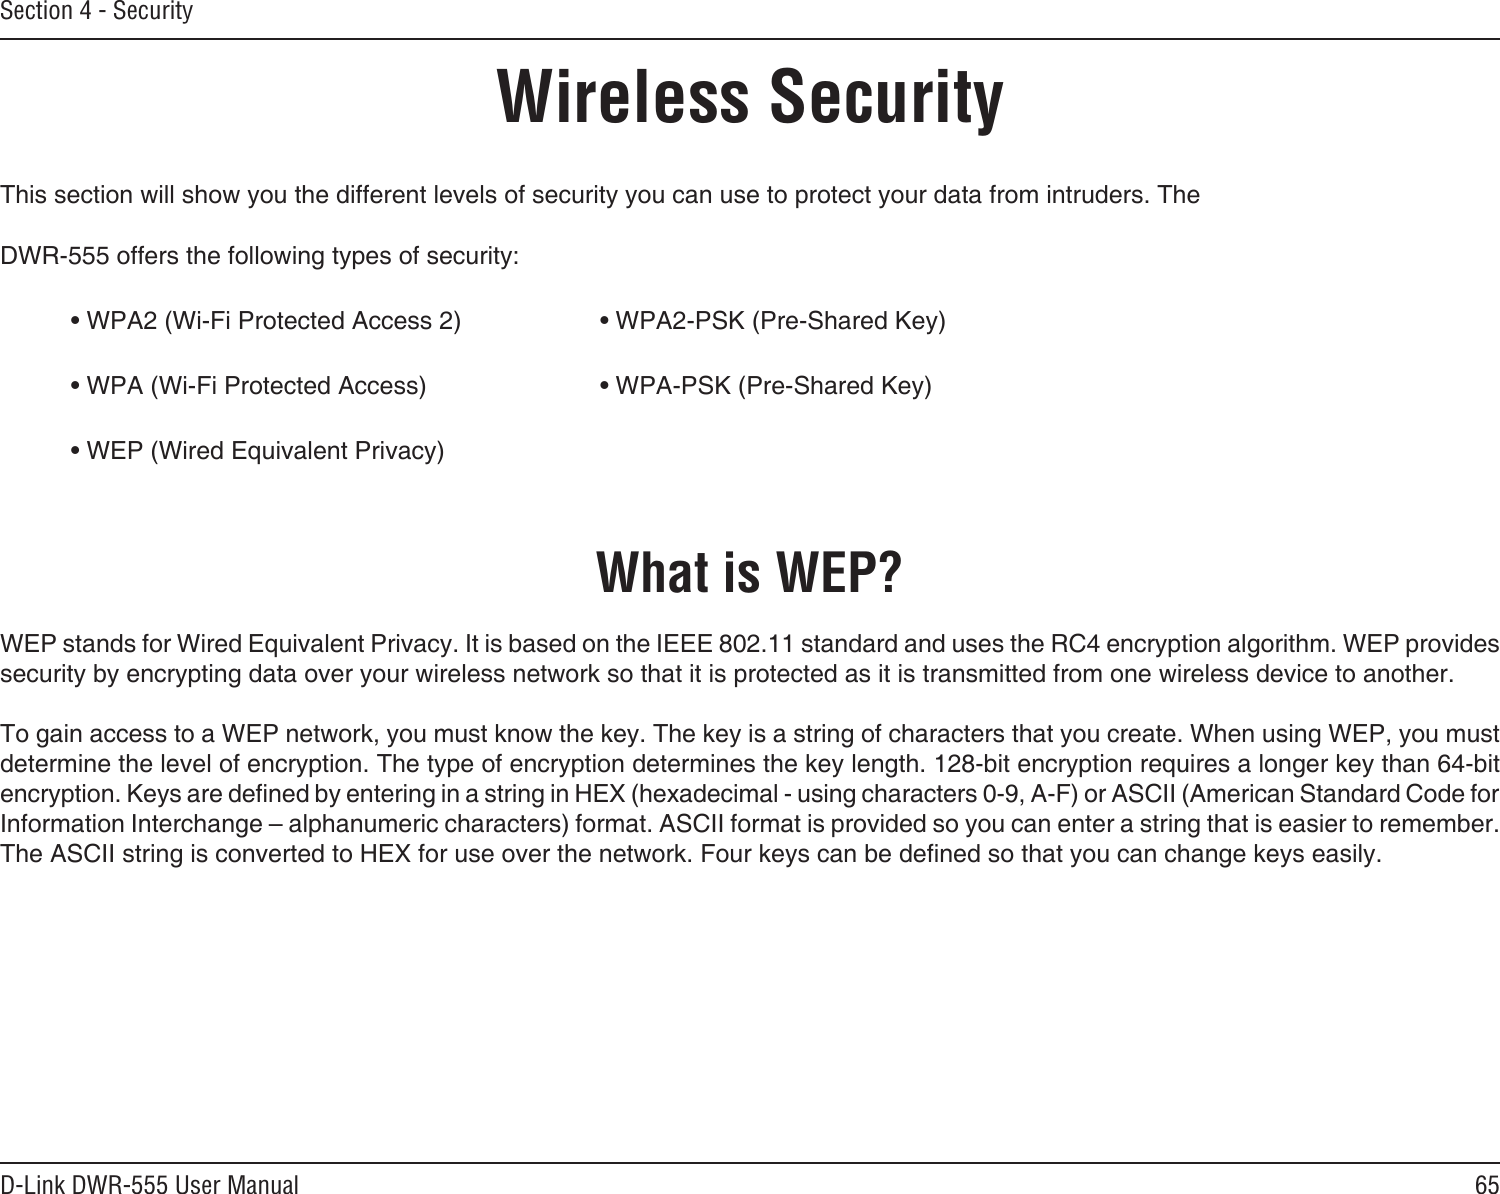 65D-Link DWR-555 User ManualSection 4 - SecurityWireless SecurityThis section will show you the different levels of security you can use to protect your data from intruders. The DWR-555 offers the following types of security:• WPA2 (Wi-Fi Protected Access 2)     • WPA2-PSK (Pre-Shared Key)• WPA (Wi-Fi Protected Access)      • WPA-PSK (Pre-Shared Key)• WEP (Wired Equivalent Privacy)What is WEP?WEP stands for Wired Equivalent Privacy. It is based on the IEEE 802.11 standard and uses the RC4 encryption algorithm. WEP provides security by encrypting data over your wireless network so that it is protected as it is transmitted from one wireless device to another.To gain access to a WEP network, you must know the key. The key is a string of characters that you create. When using WEP, you must determine the level of encryption. The type of encryption determines the key length. 128-bit encryption requires a longer key than 64-bit encryption. Keys are dened by entering in a string in HEX (hexadecimal - using characters 0-9, A-F) or ASCII (American Standard Code for Information Interchange – alphanumeric characters) format. ASCII format is provided so you can enter a string that is easier to remember. The ASCII string is converted to HEX for use over the network. Four keys can be dened so that you can change keys easily.